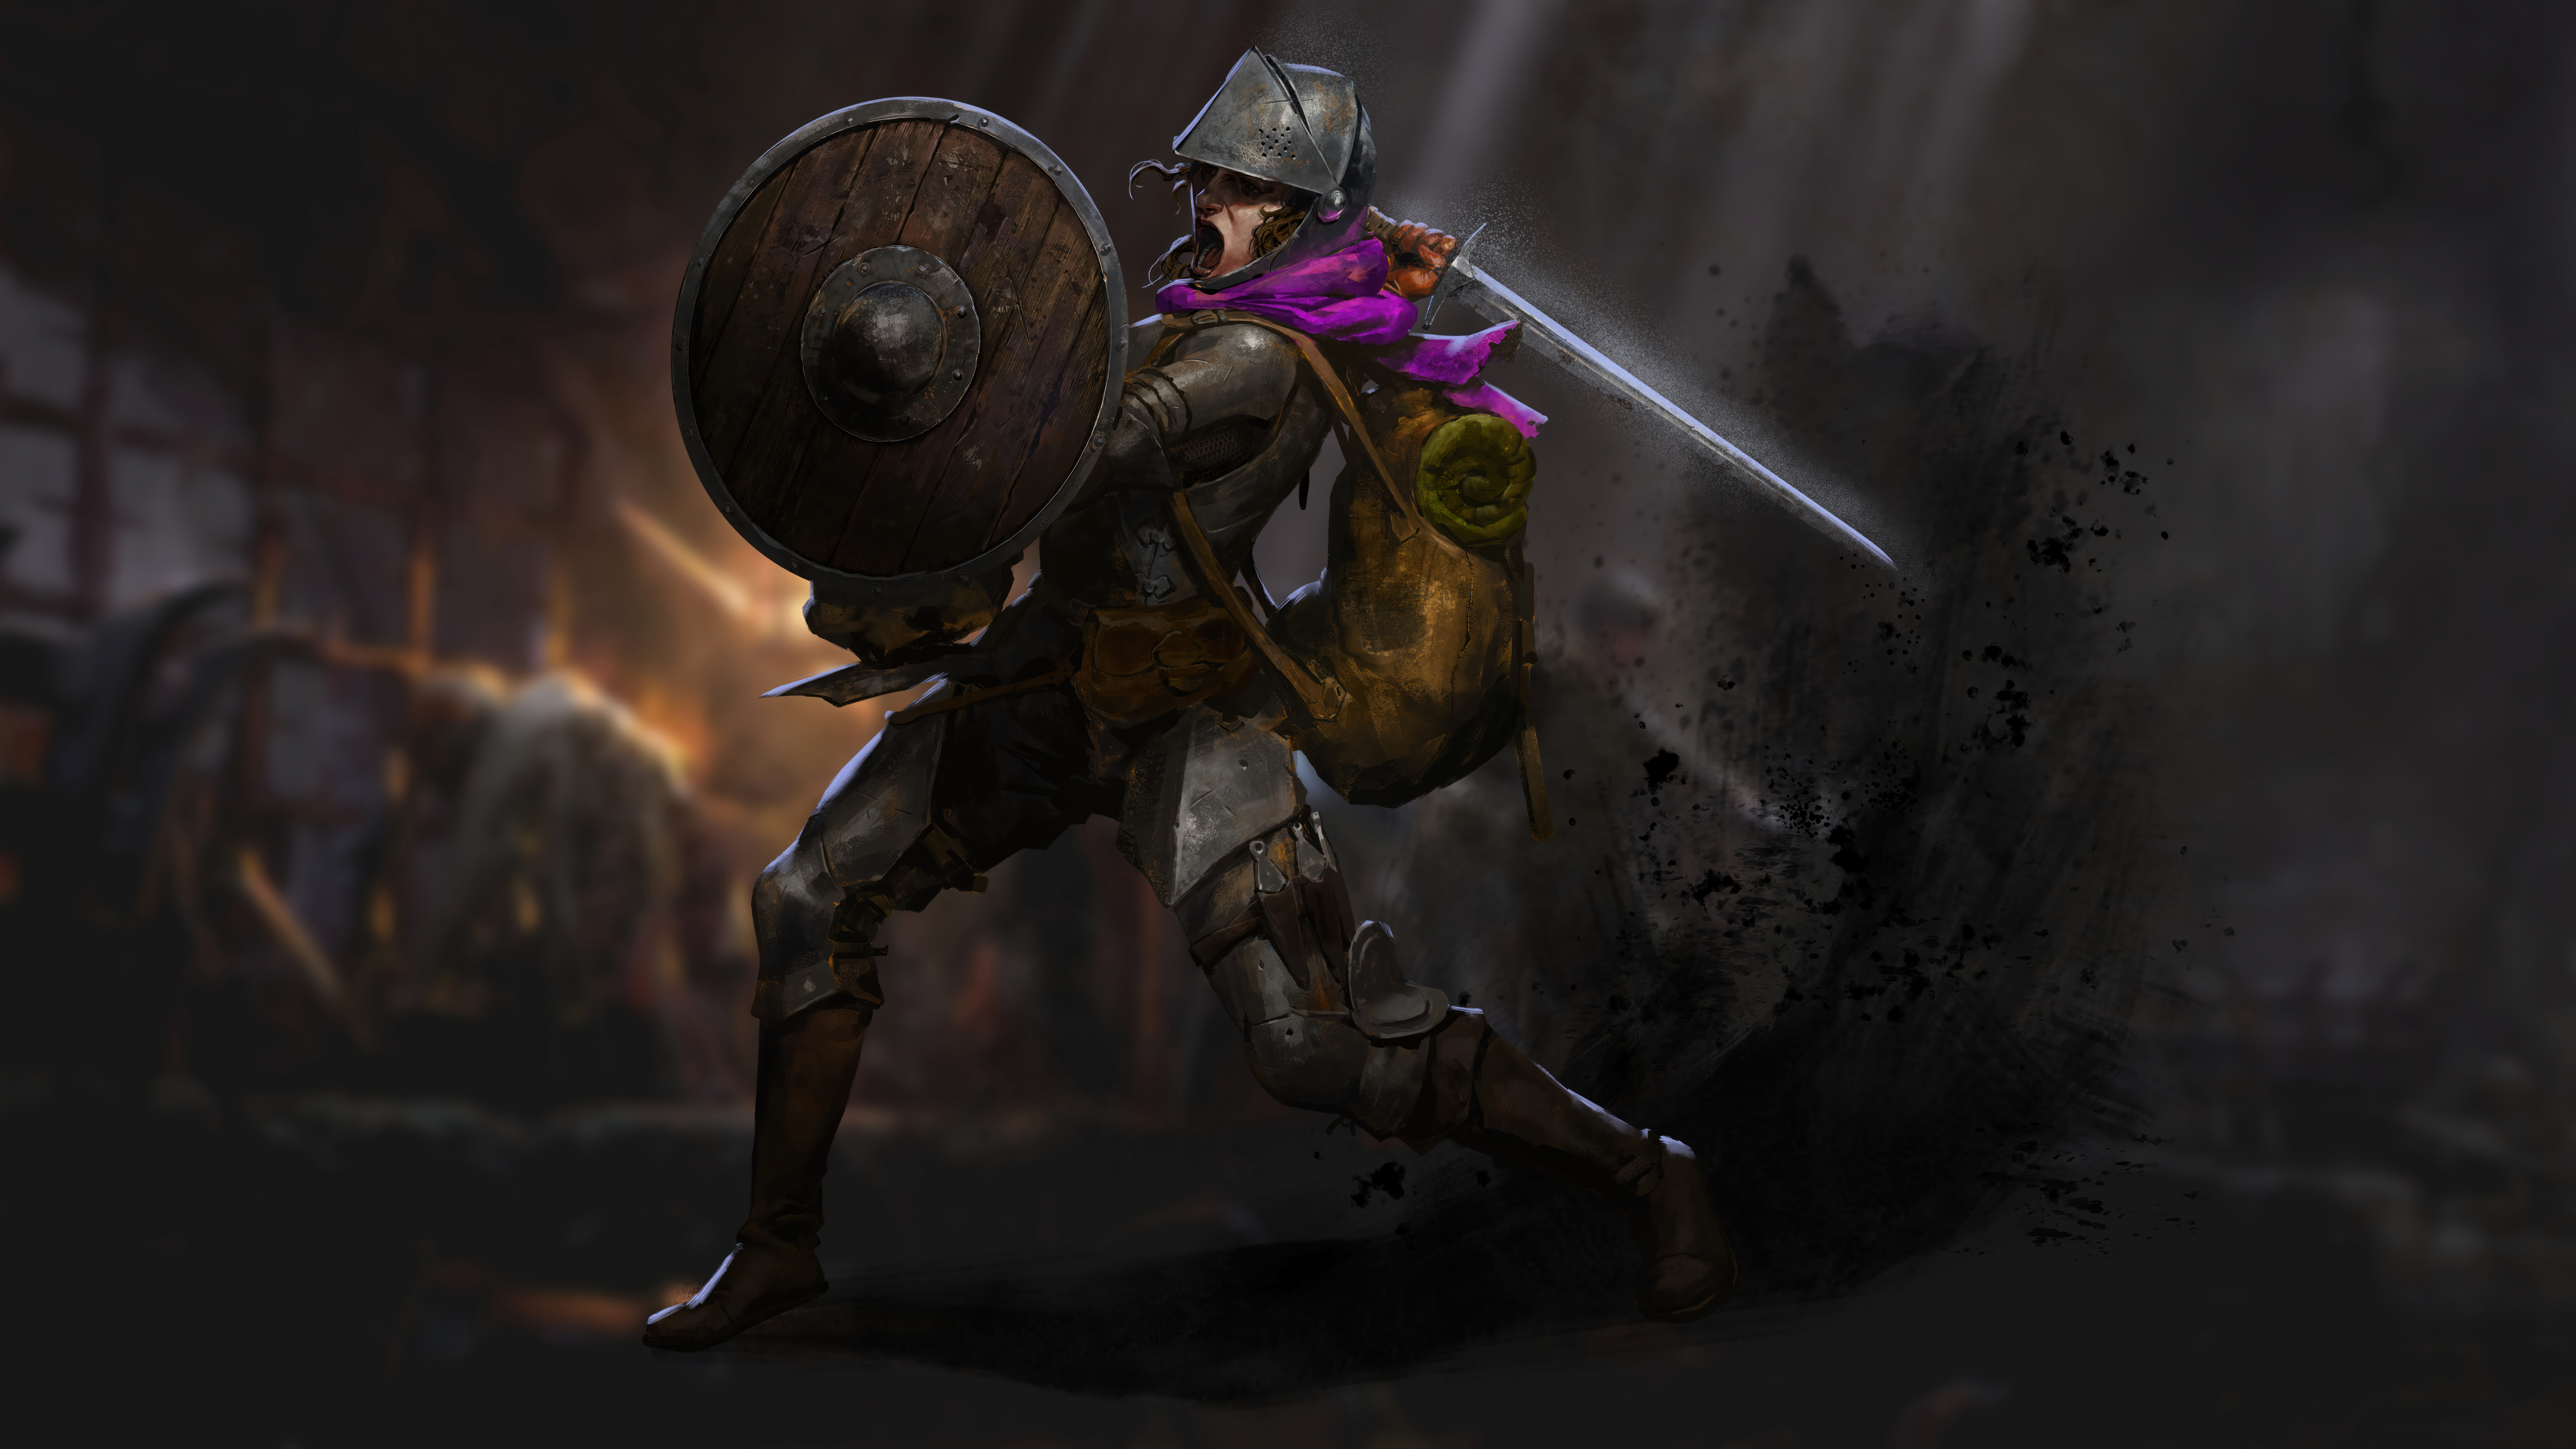 HD wallpaper featuring a medieval warrior with shield and sword in action, tagged Dark and Darker.